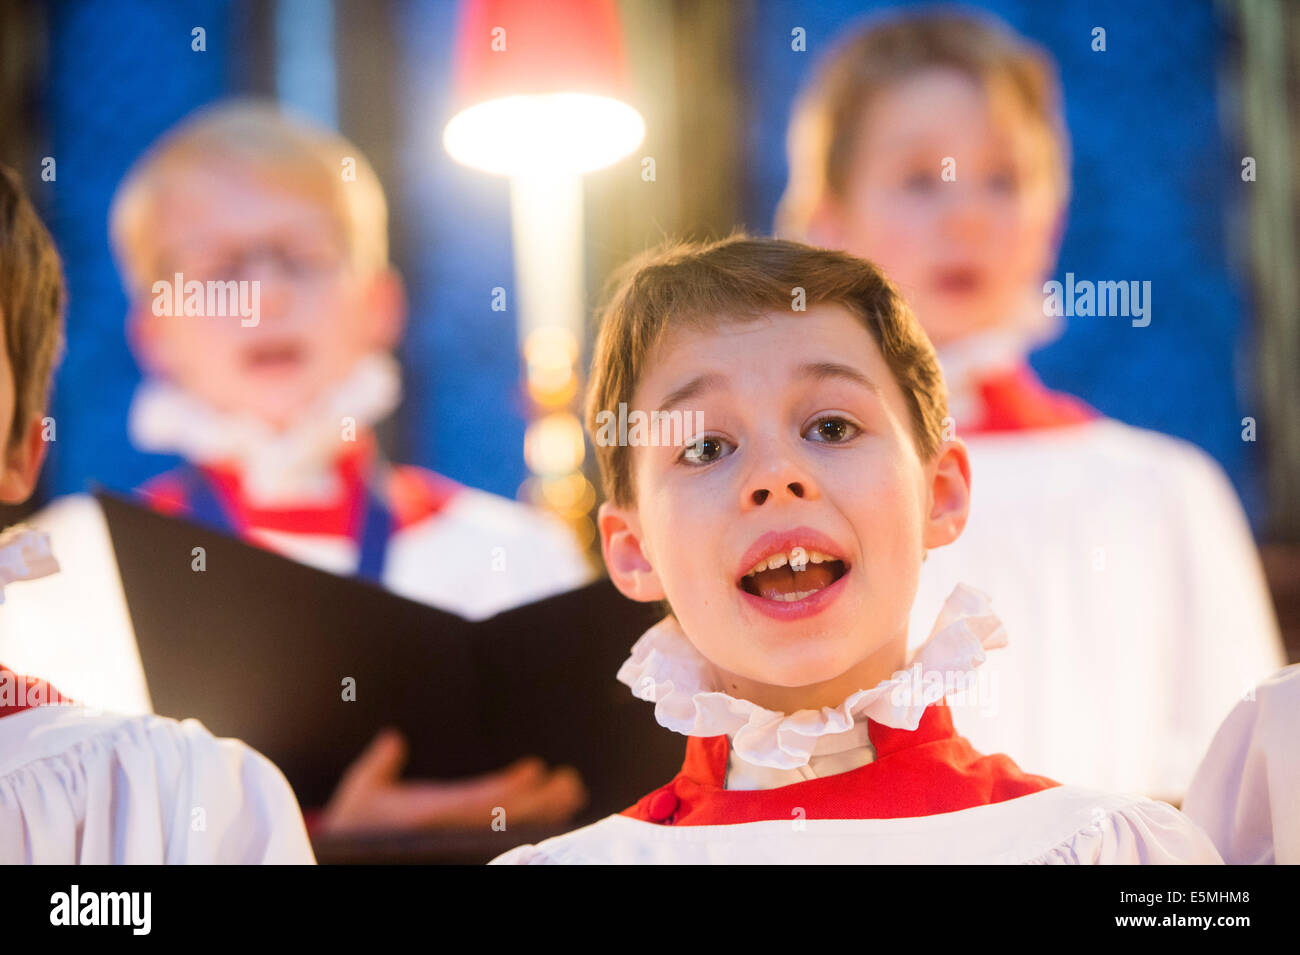 Westminster Abbey.Pic Shows Choir boys from Westminster Abbey rehearsing ahead of the Christmas events Stock Photo